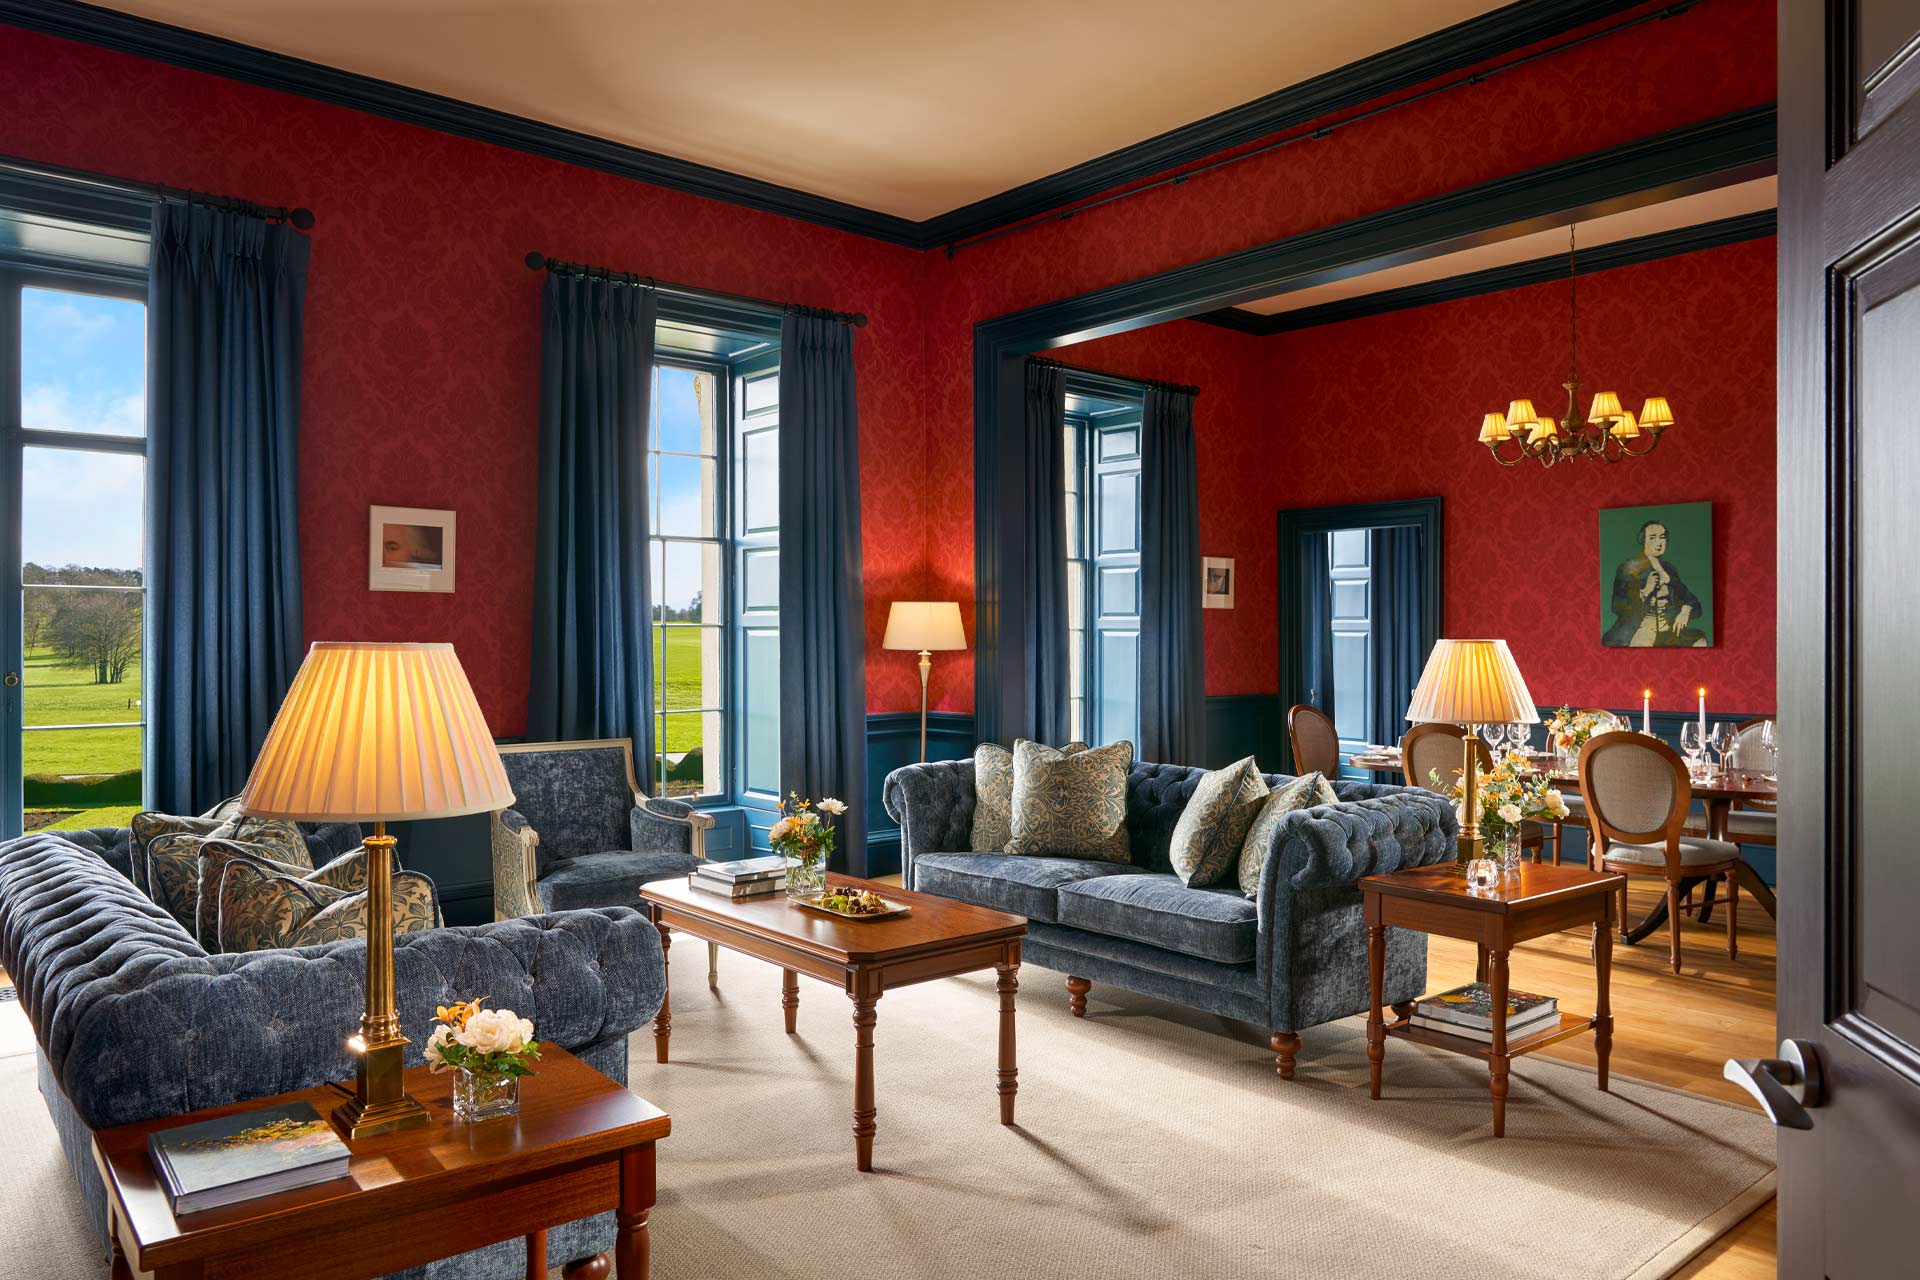 The Presidential Suite at Carton House in County Kildare, Ireland